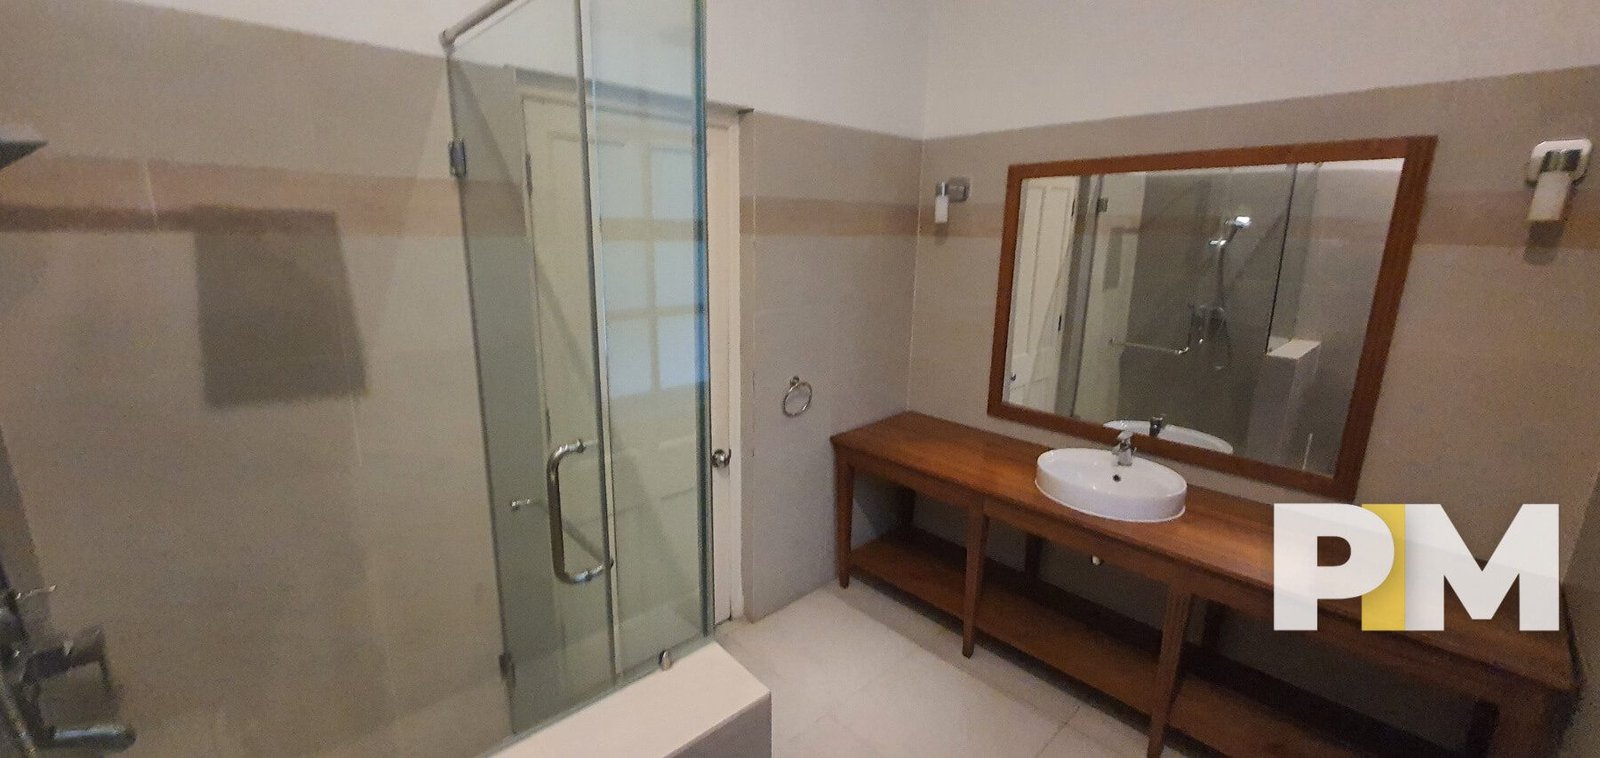 Shower room with sink - Yangon Real Estate